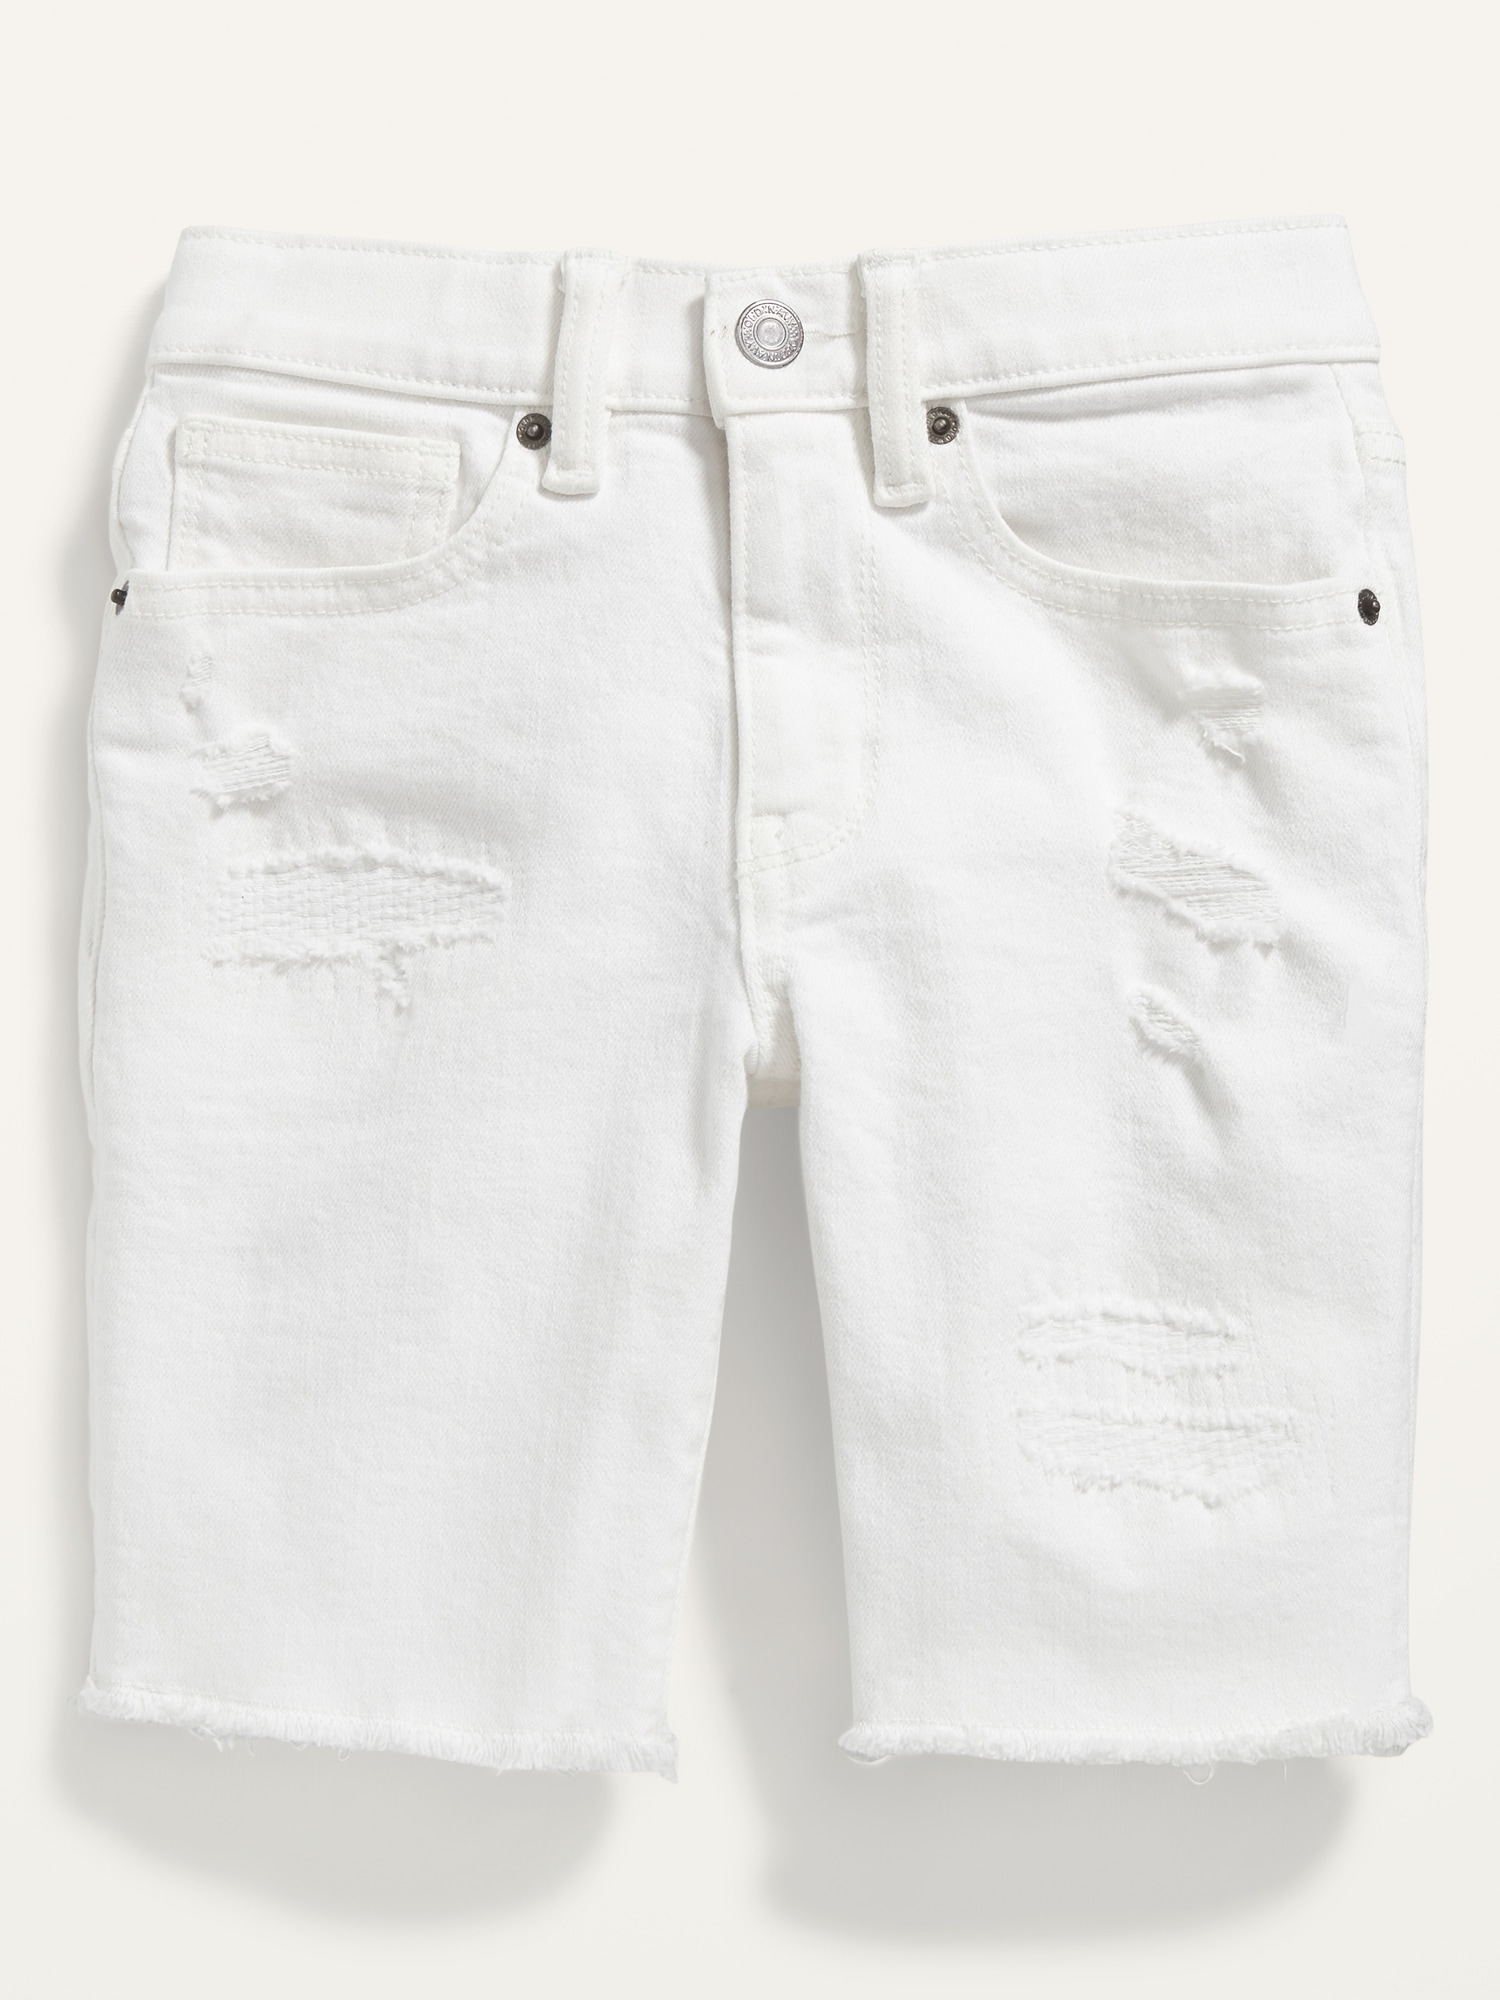 Karate Built-In Flex Ripped Cut-Off Jean Shorts for Boys